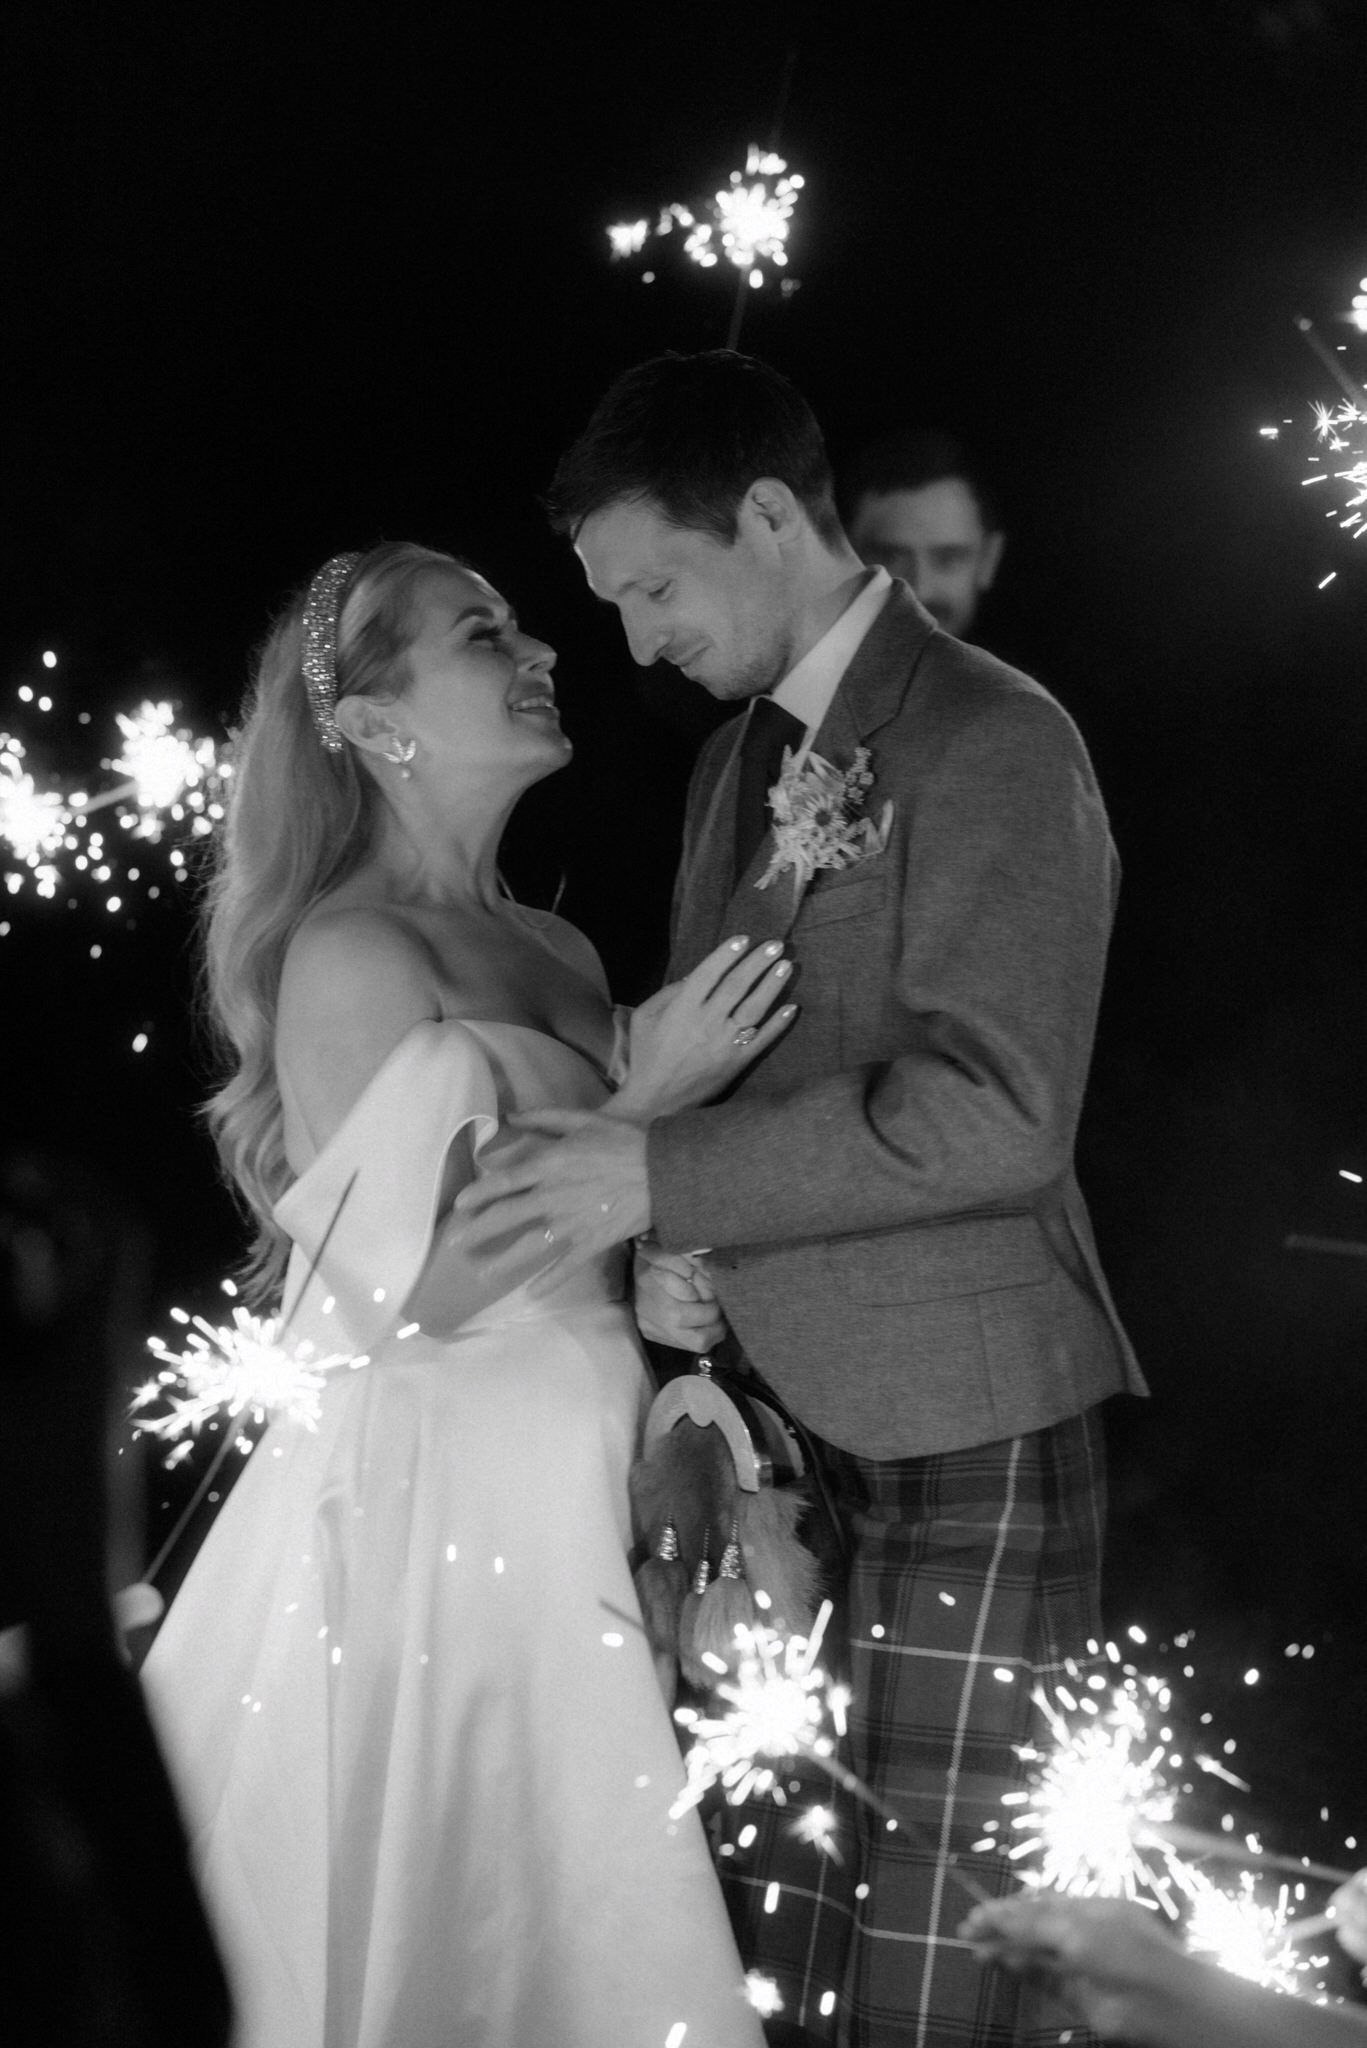 bride and groom dancing and running in sparklers during their wedding day in Scotland